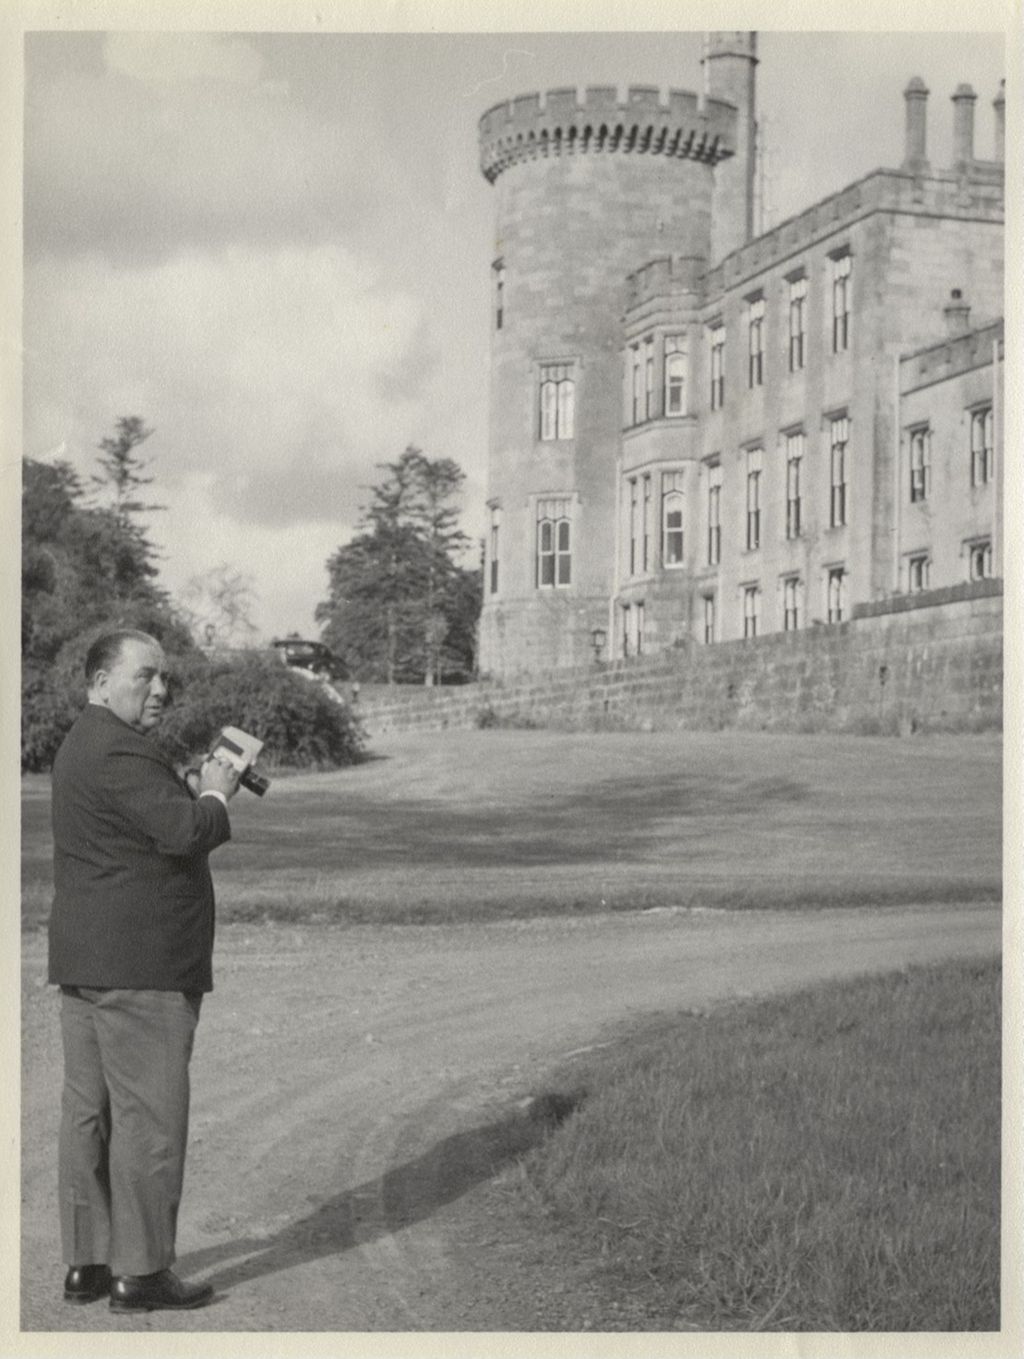 Miniature of Trip to Ireland, Richard J. Daley with a camera outside a castle